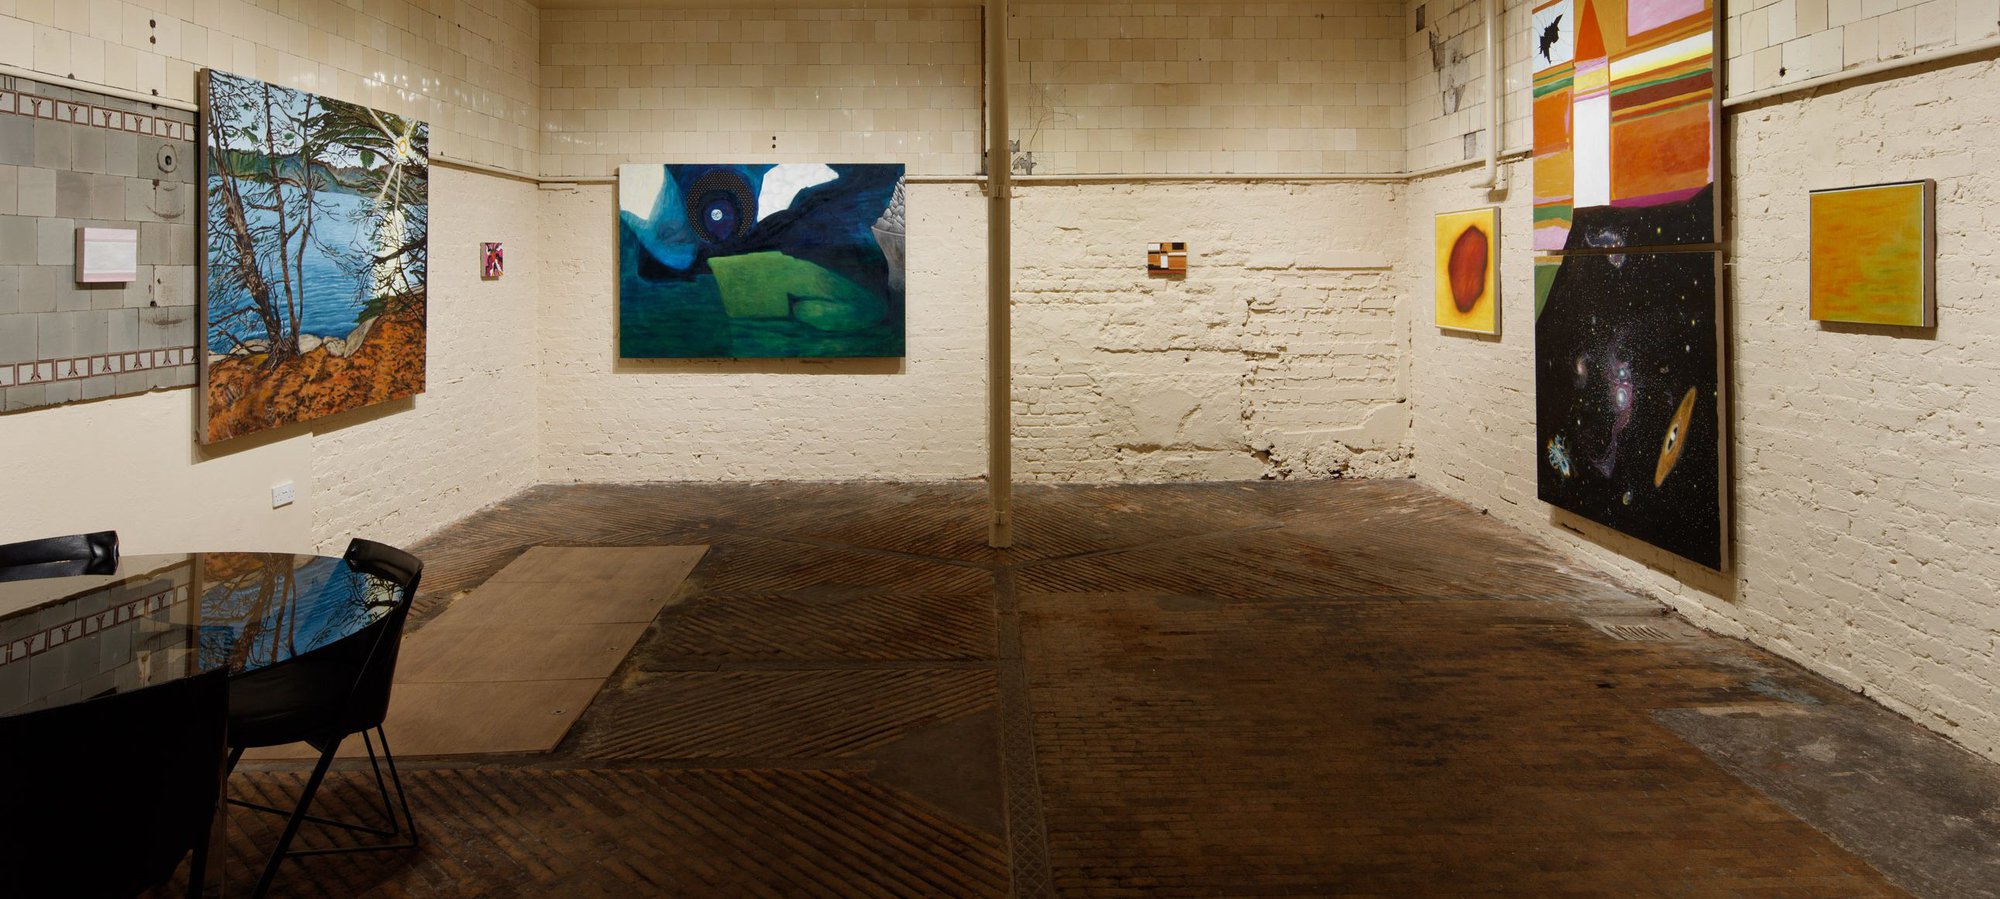 Installation view, Leidy Churchman, The Between is Ringing, Rodeo, London, 2021